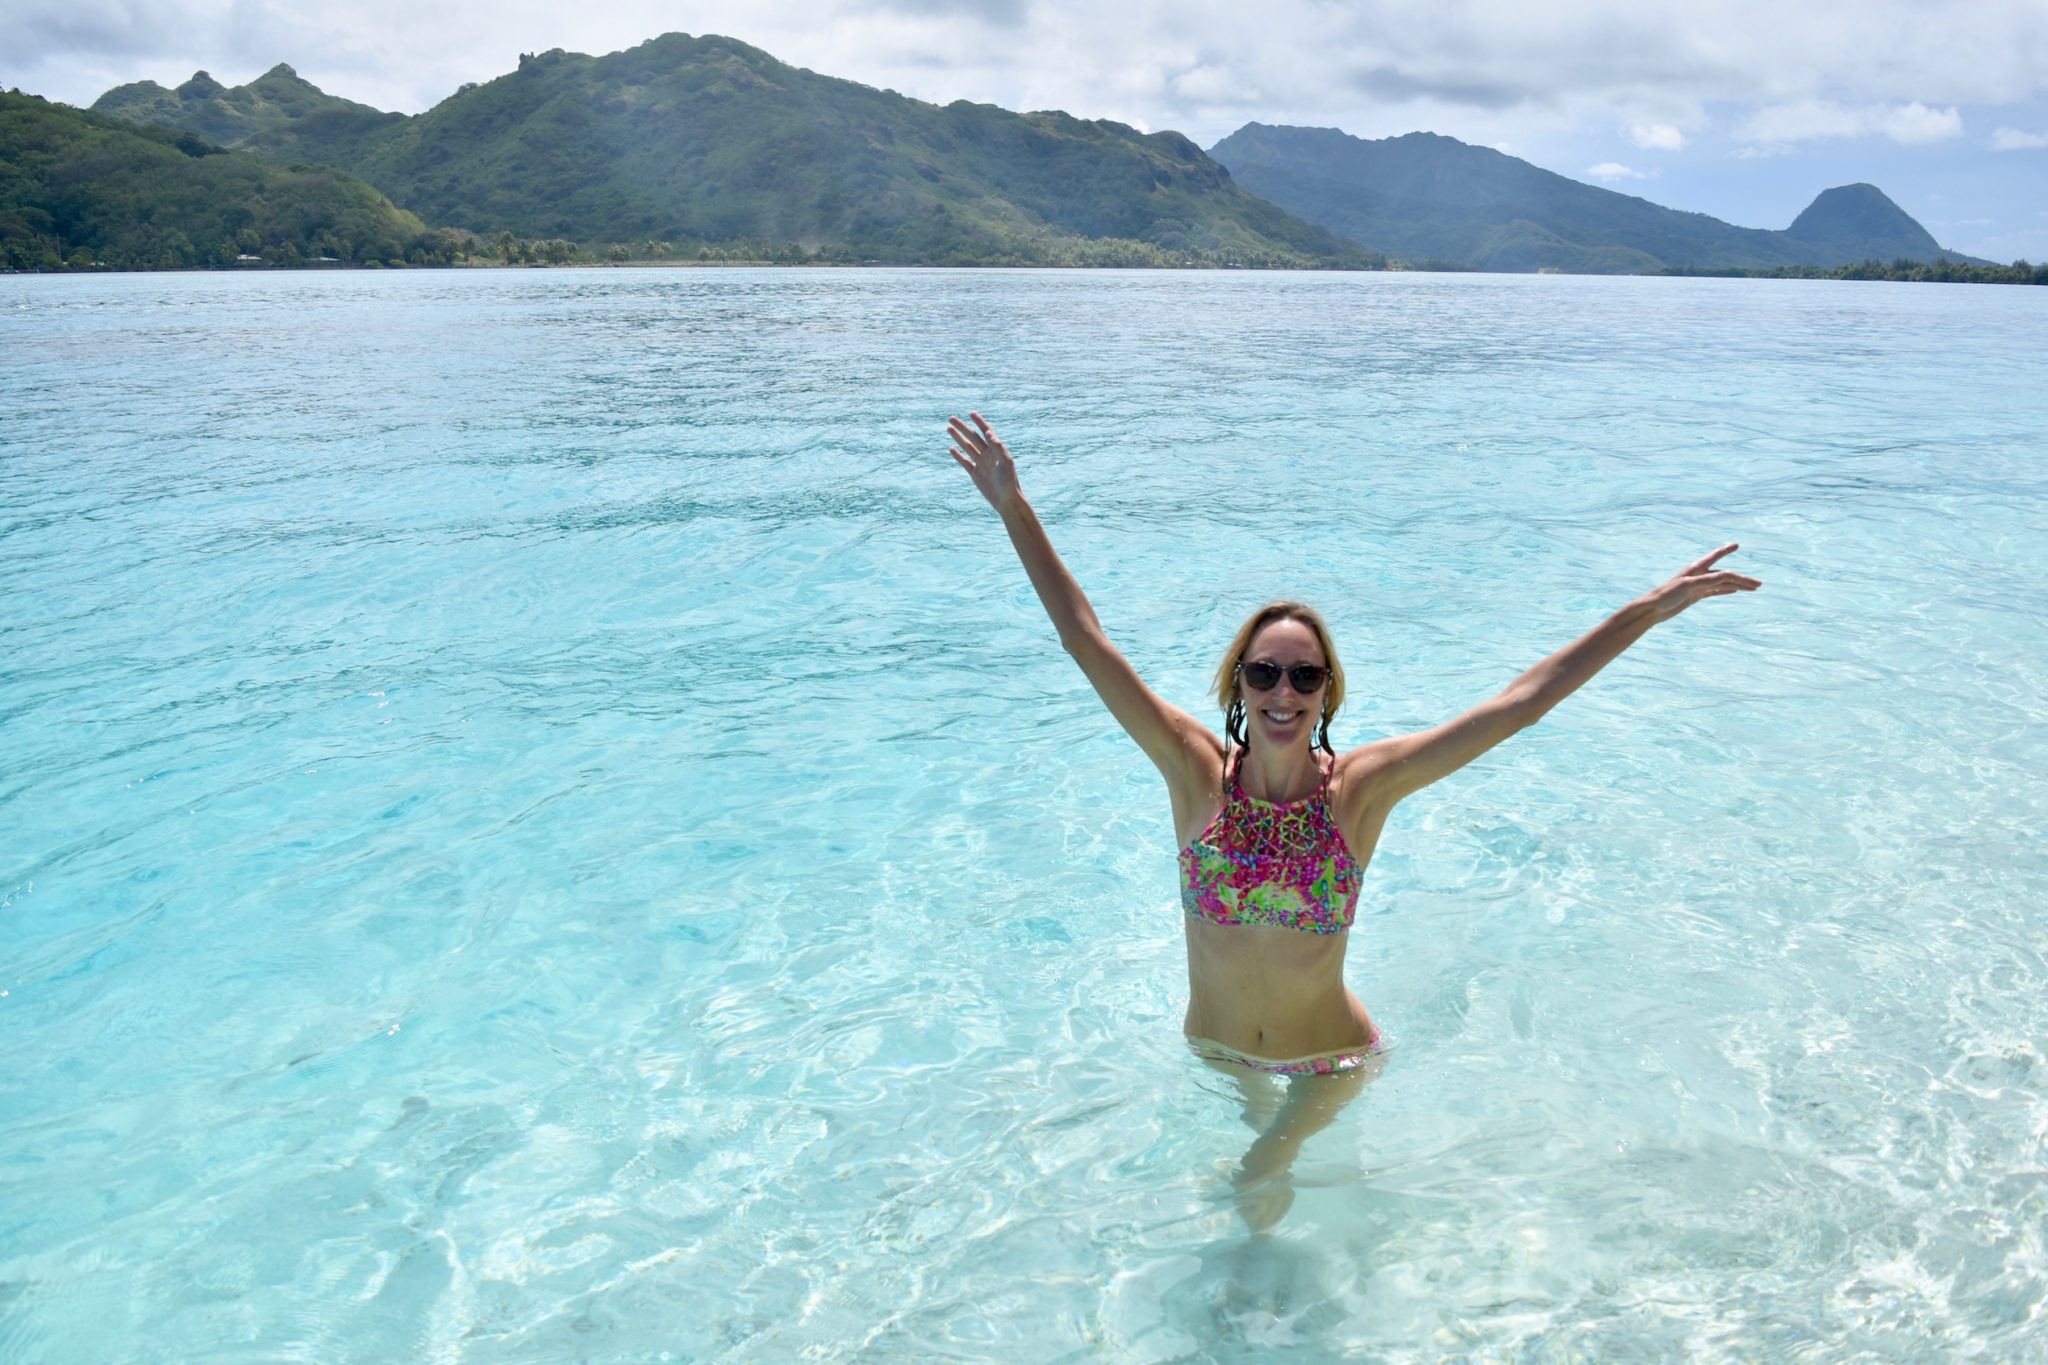 Hayley enjoying the clear waters of French Polynesia